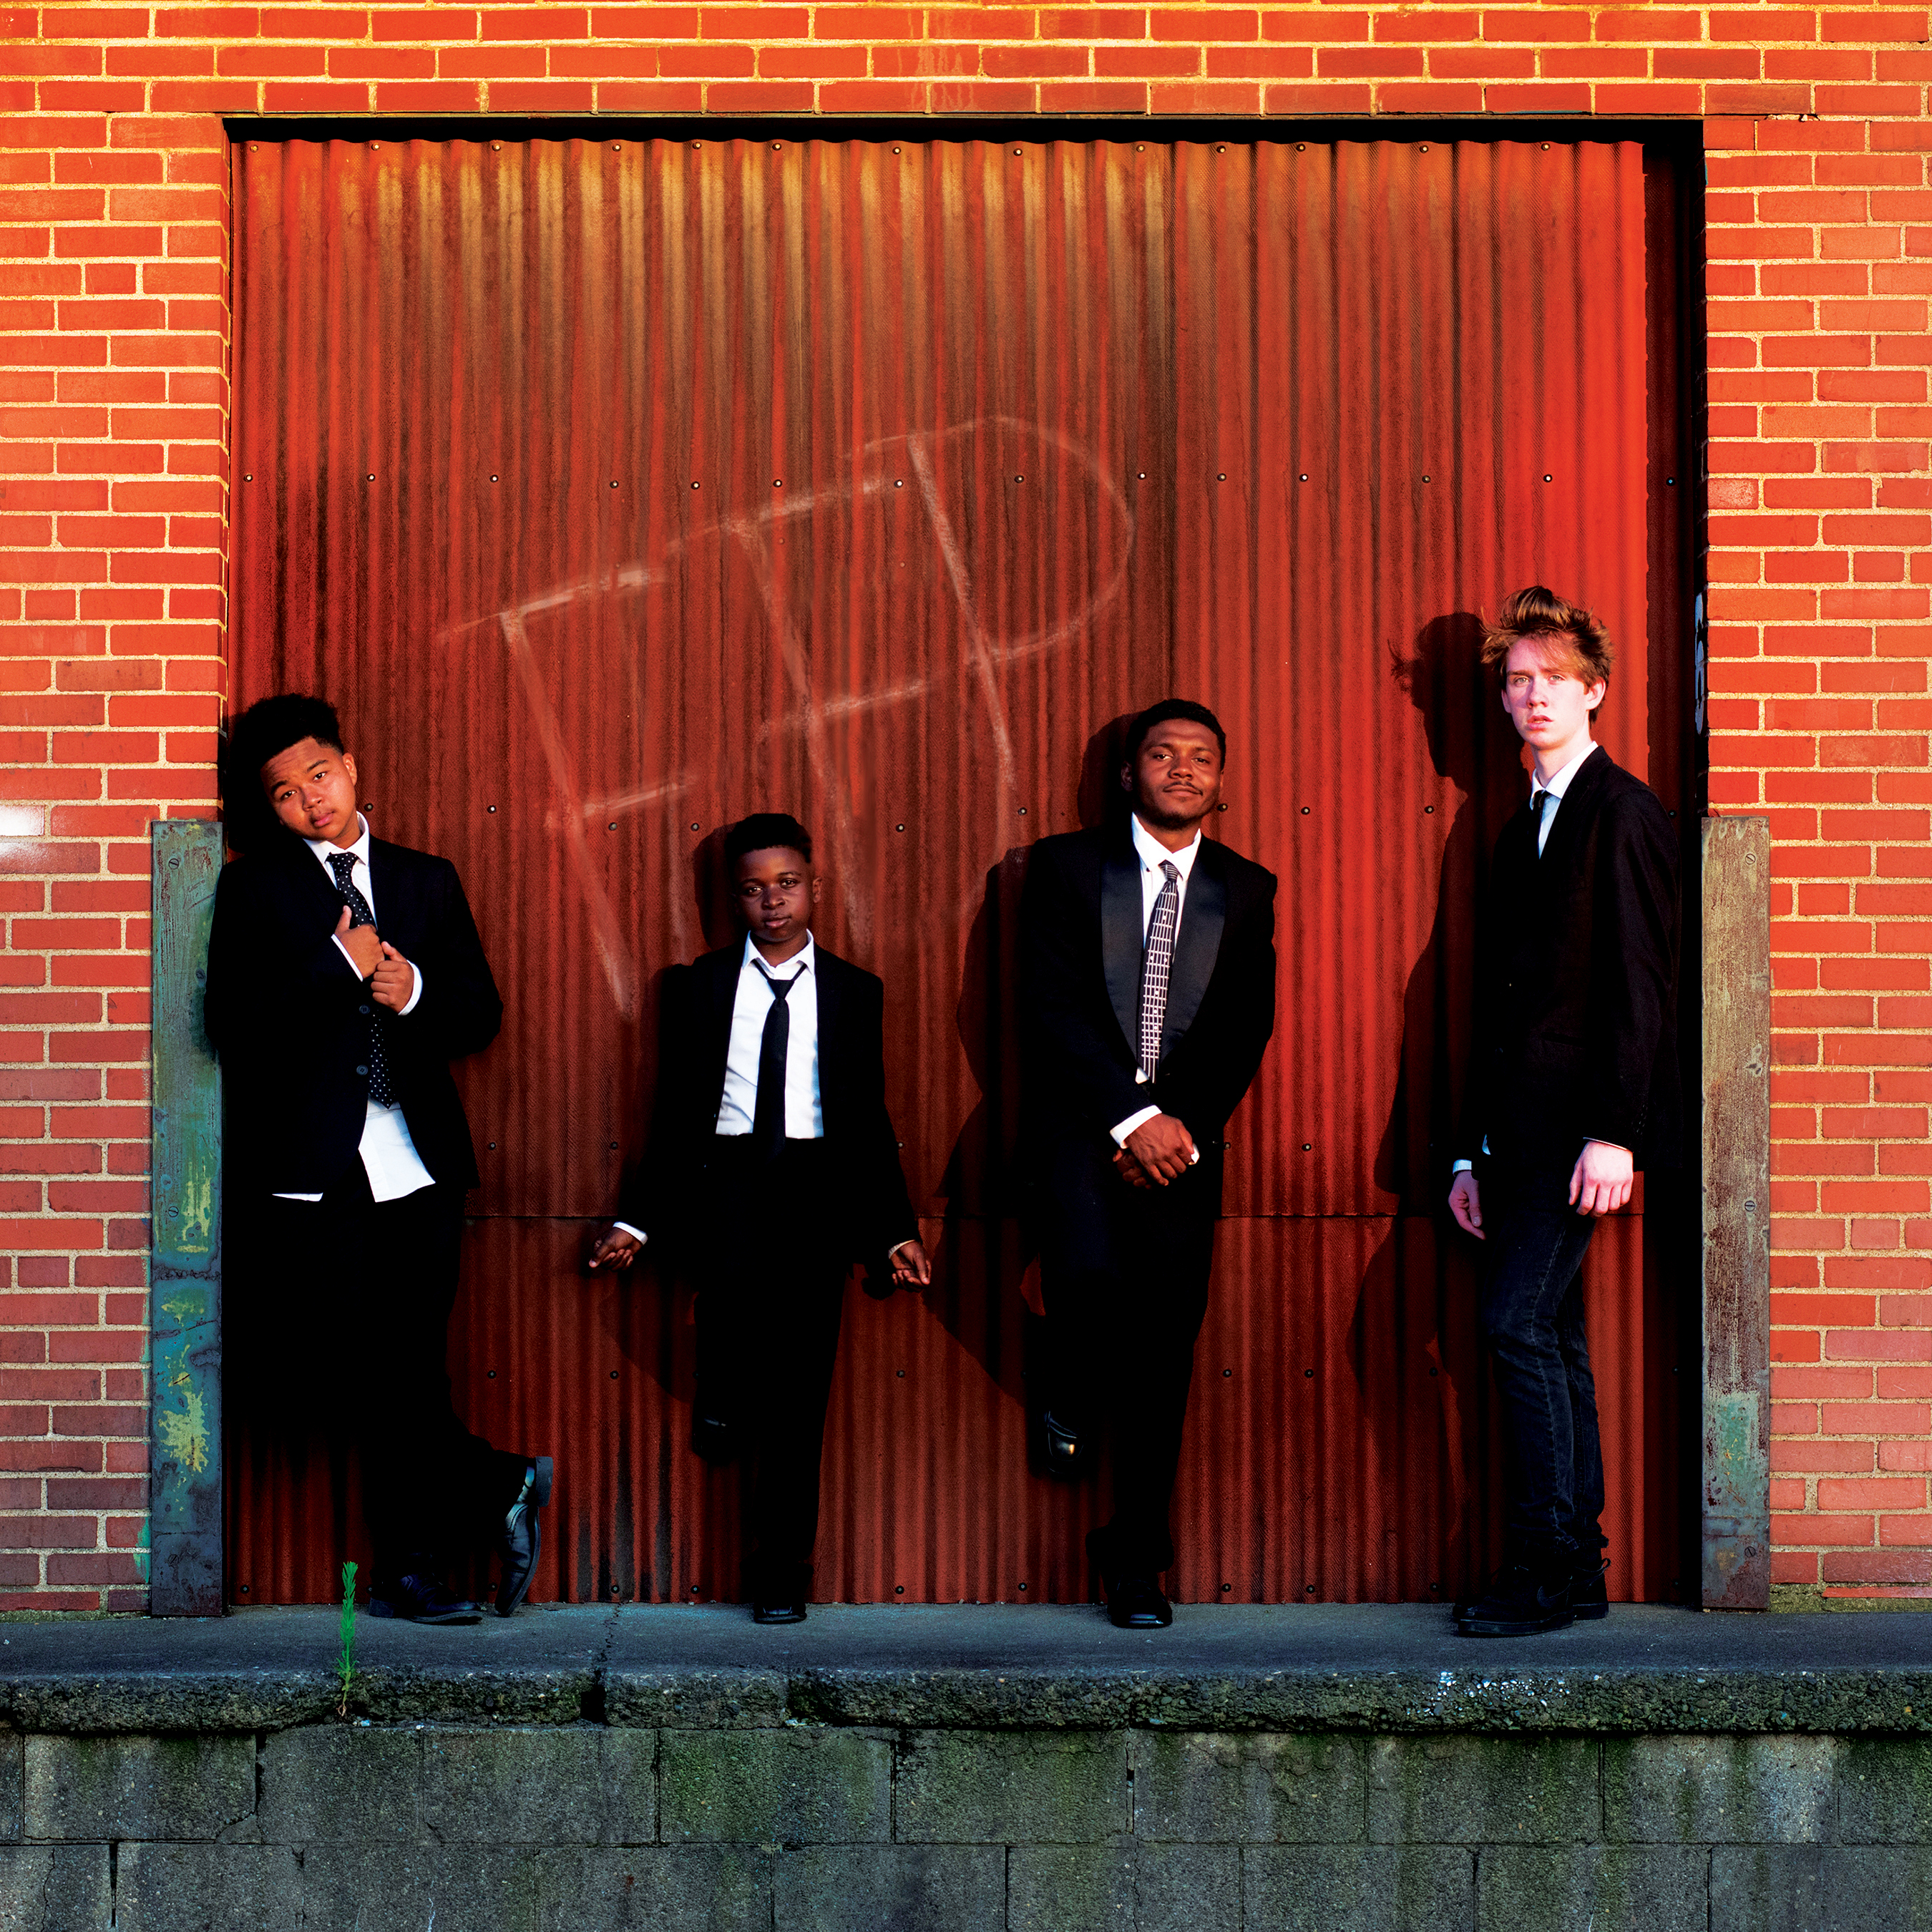 The Funky Fly Project Debut Cd "Déjà  vu" was released in October of 2017. The Funky Fly Project from left to right: Winston Bell, Brandon Terry, Eric Dowdell Jr., Henry Schultz